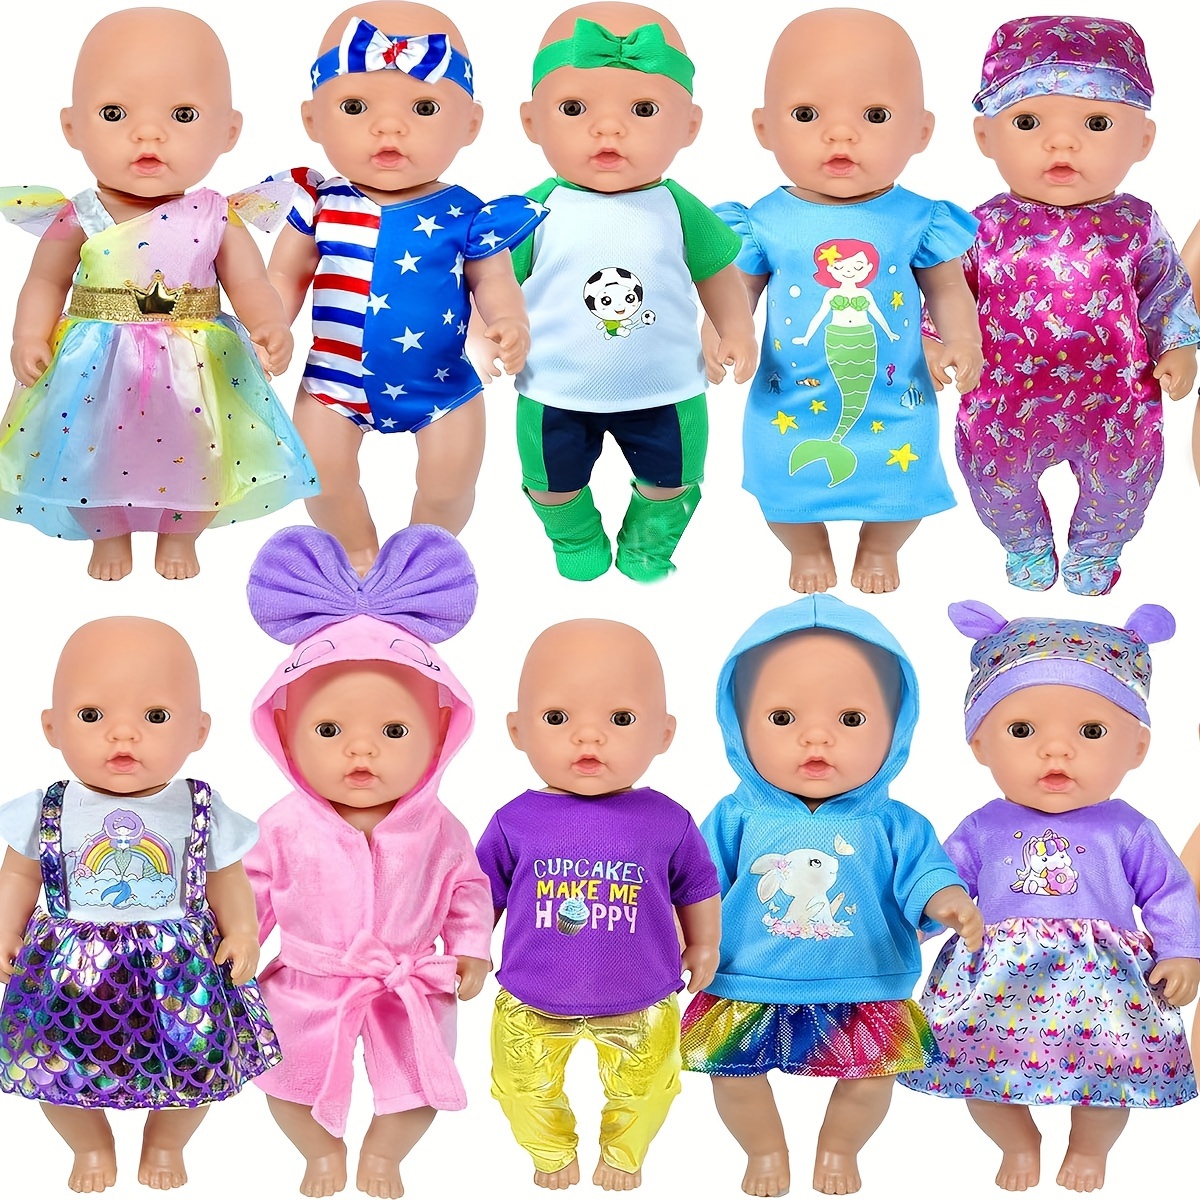 

10 Sets 16-18 Inch Doll Clothes Accessories Doll Dress Rompers Doll Clothing Outfits Fits Bitty-15-inch-baby-doll, American-18-inch Doll (not Included Doll) Easter Gift